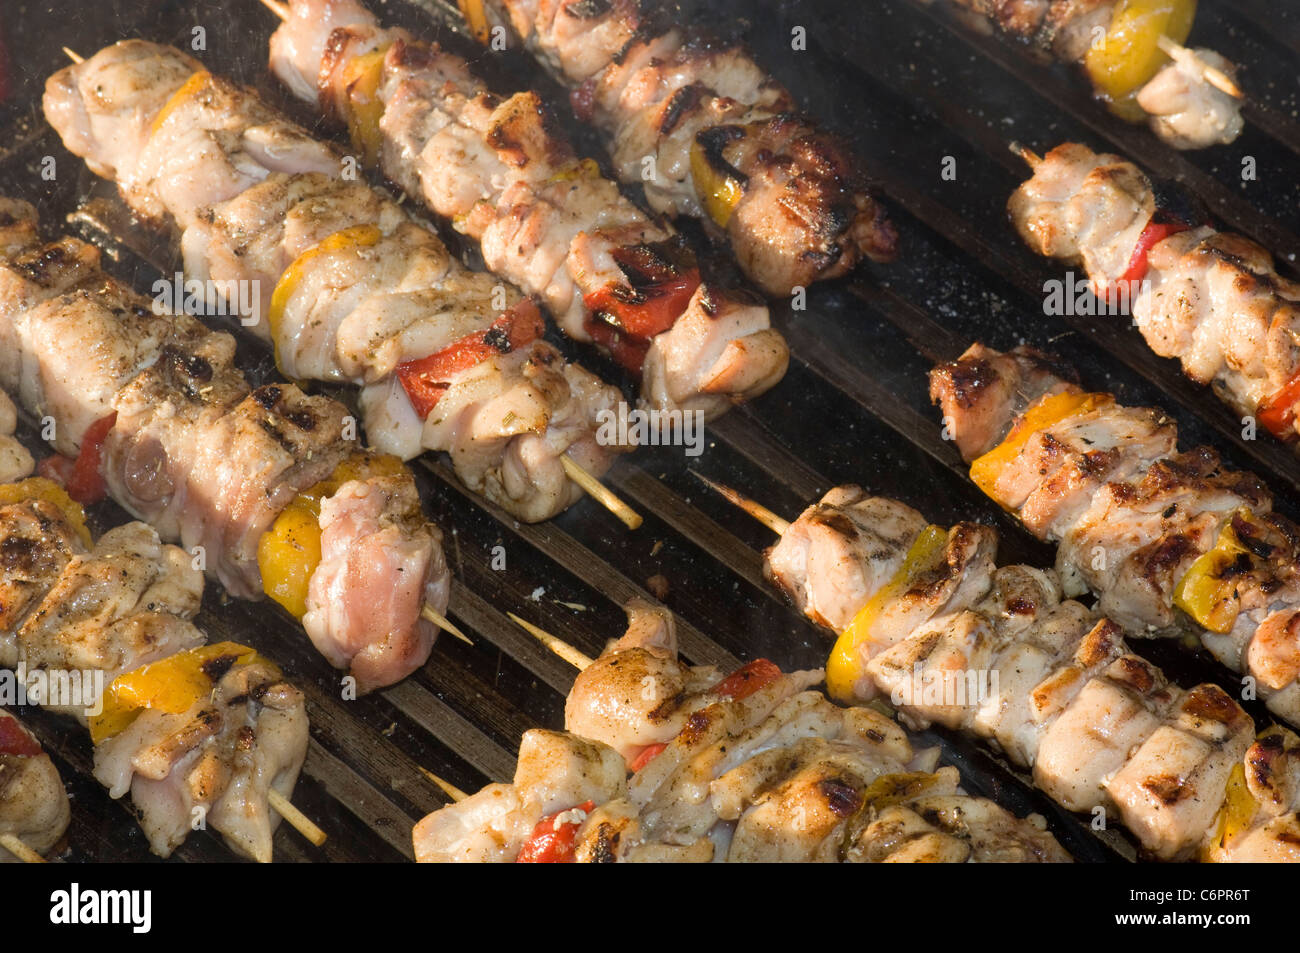 Food barbecued Stock Photo